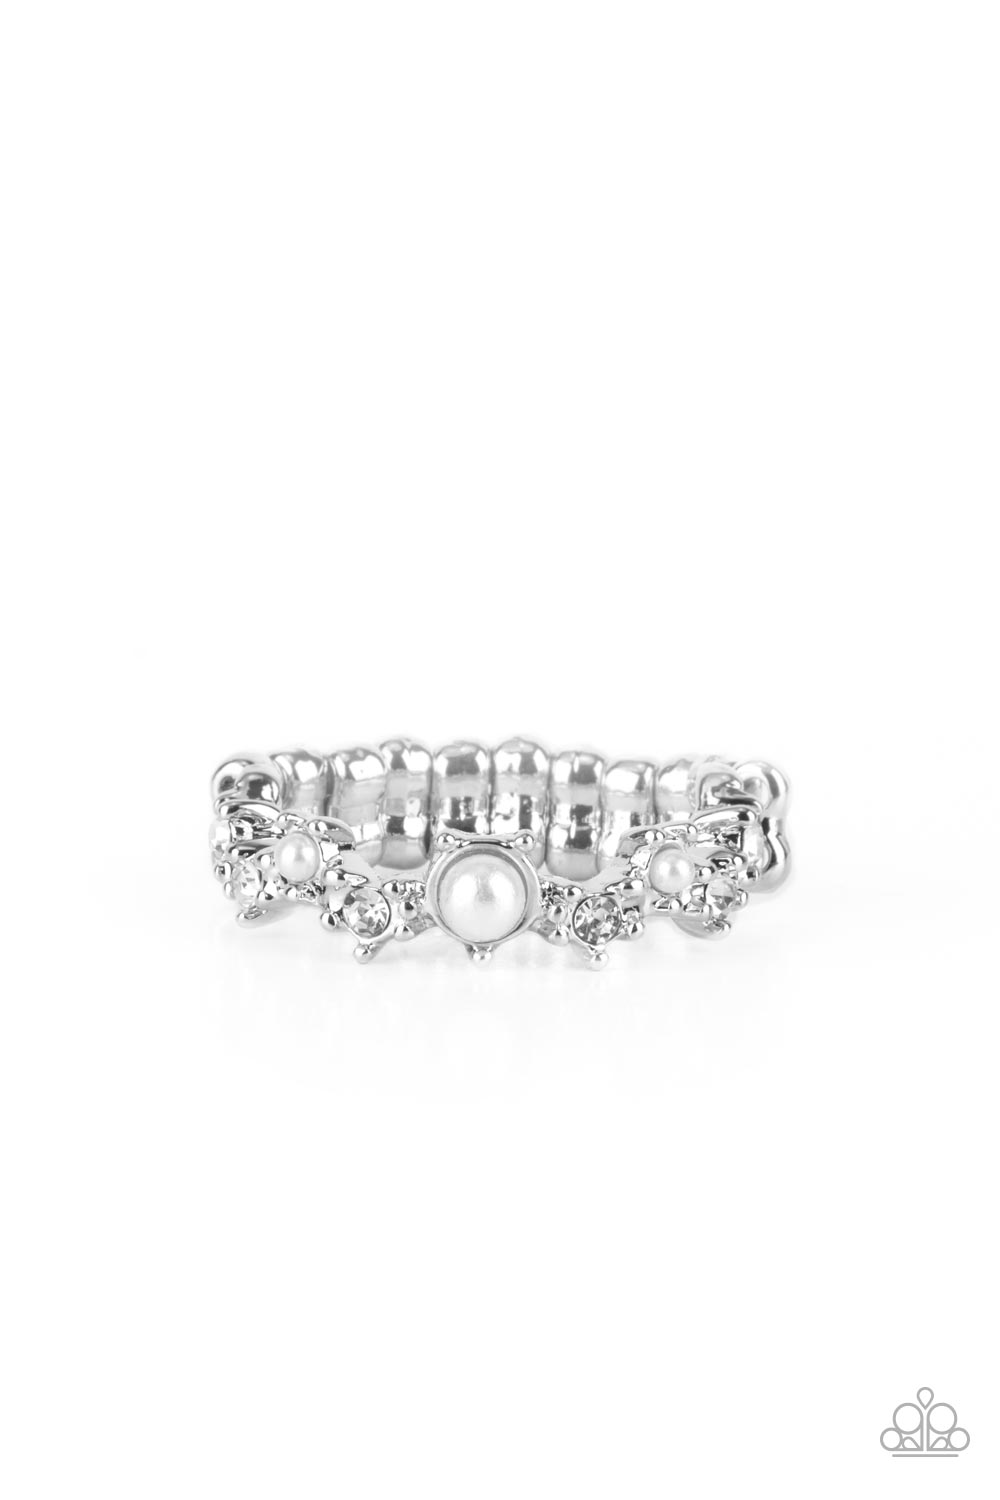 Blissfully Bella - White Pearl Silver Ring